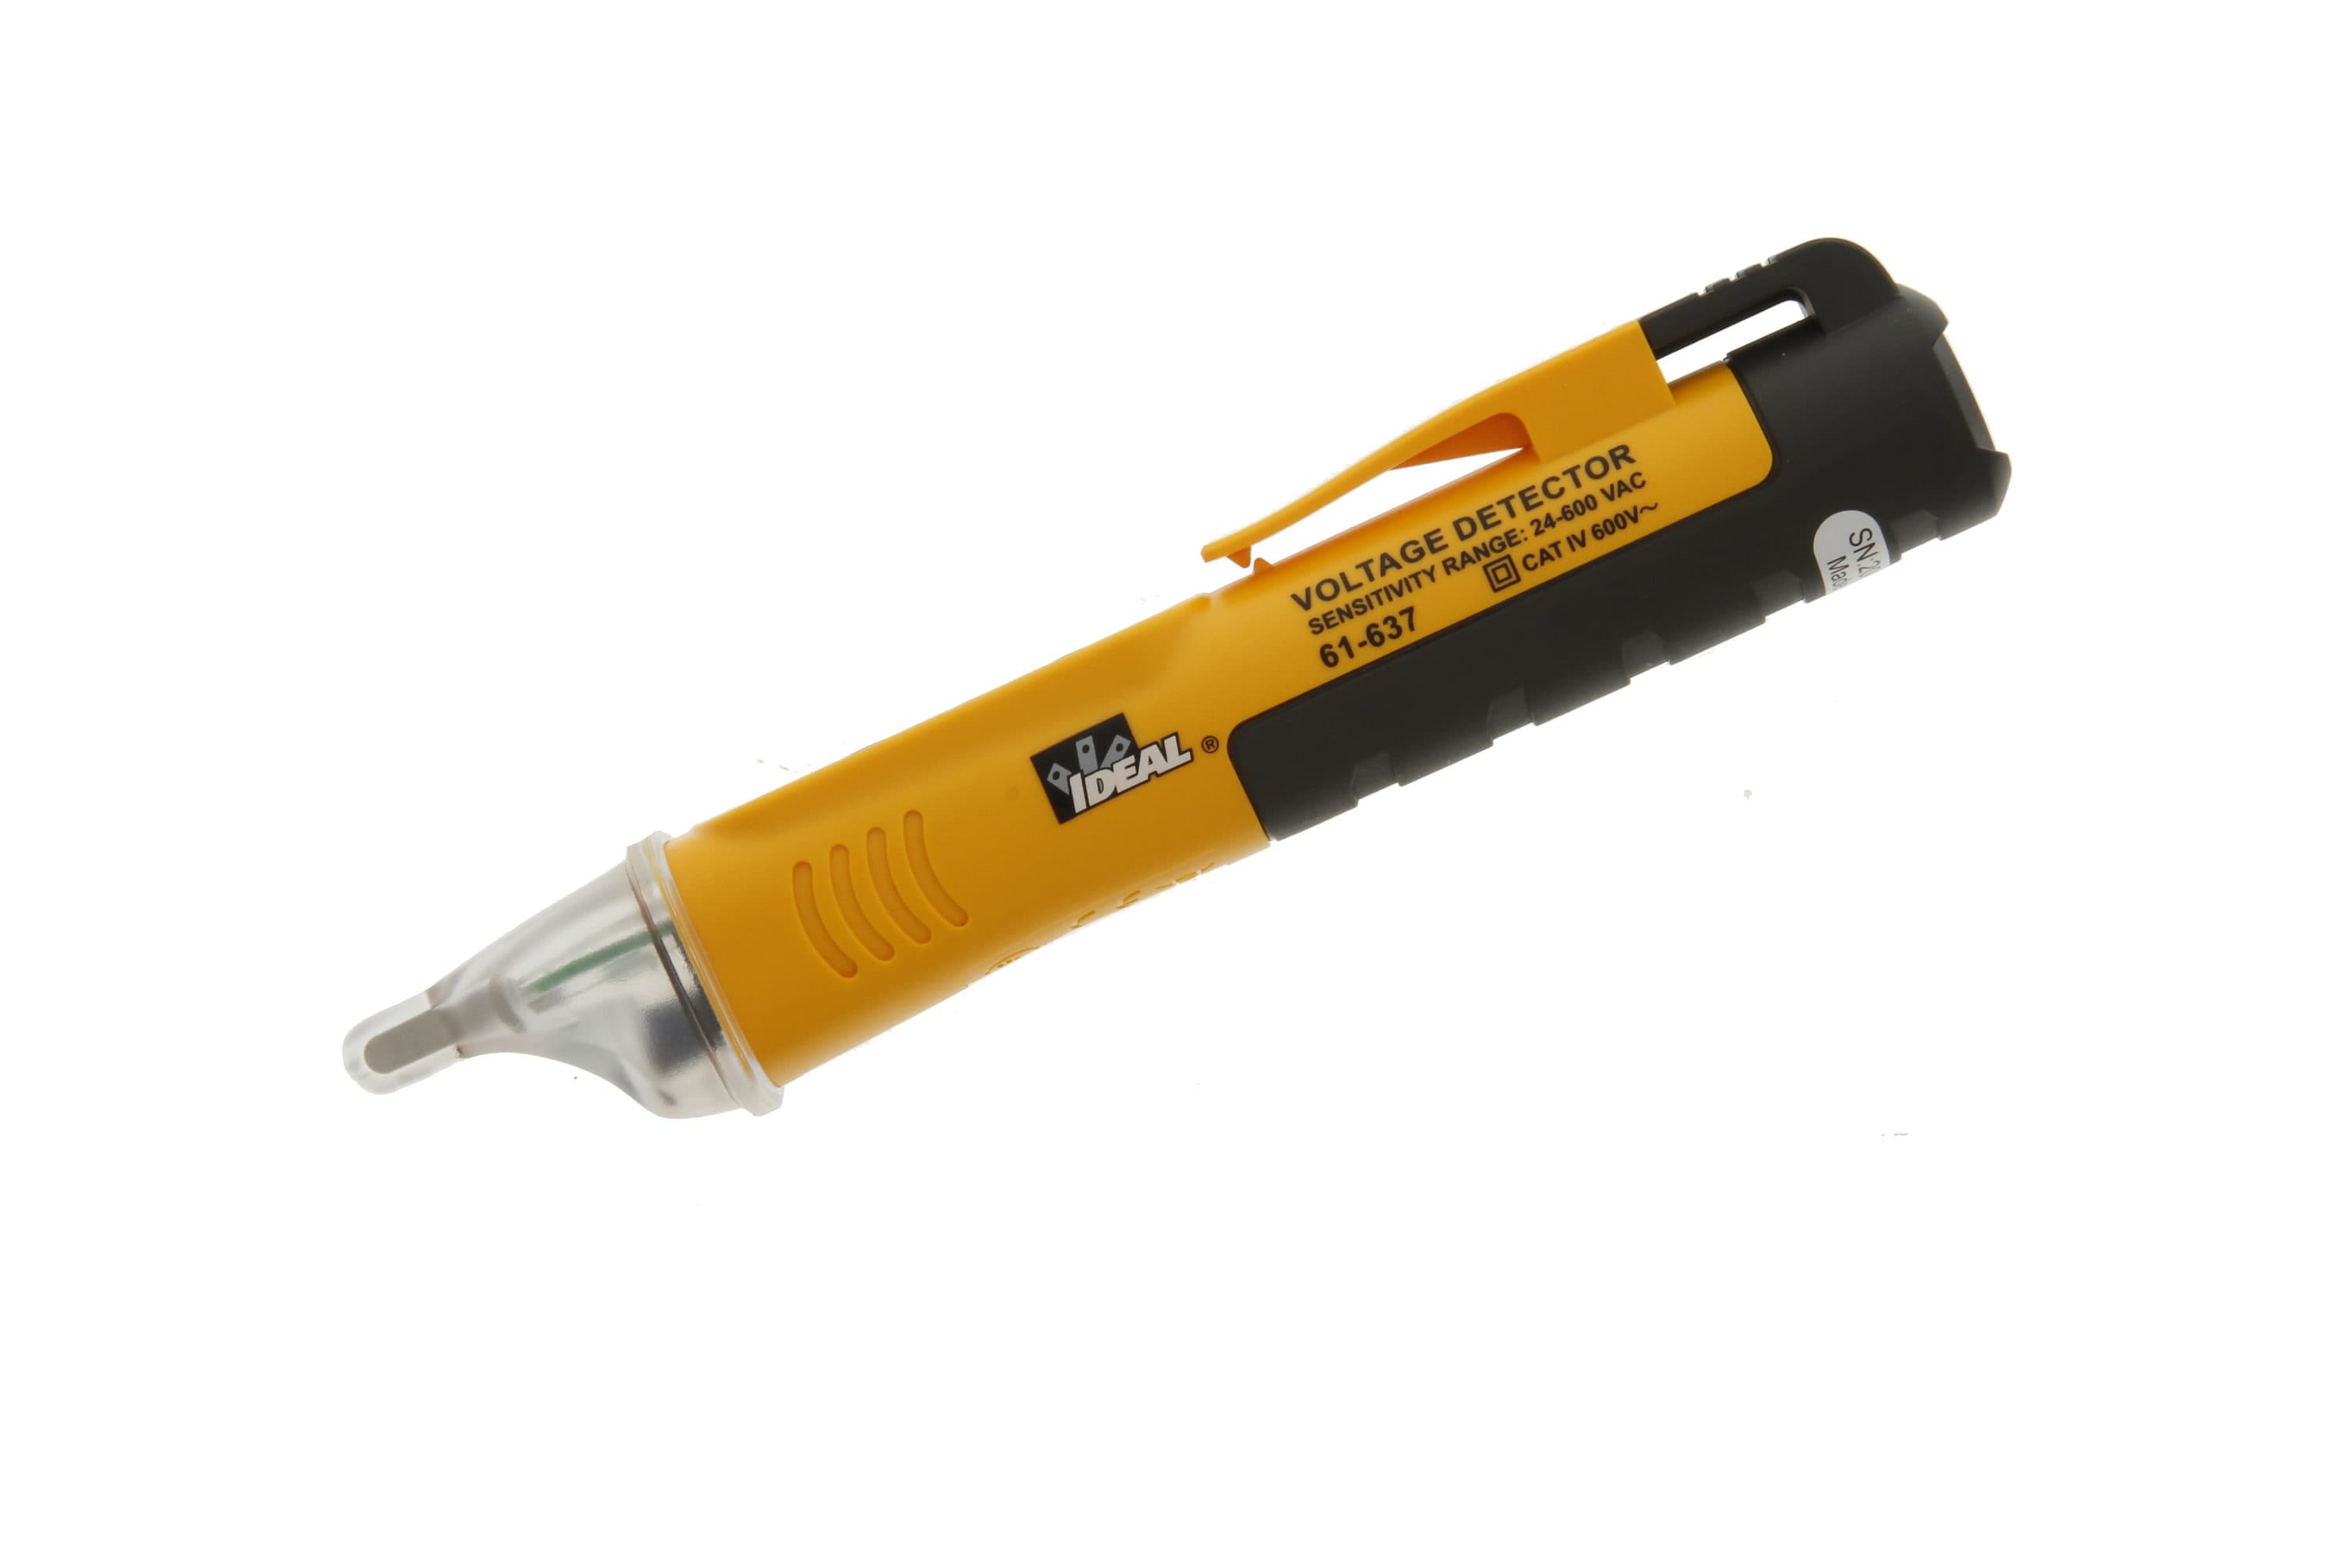 VILLCASE Power Tools Wisking Tool Electric Non- Voltage Tester